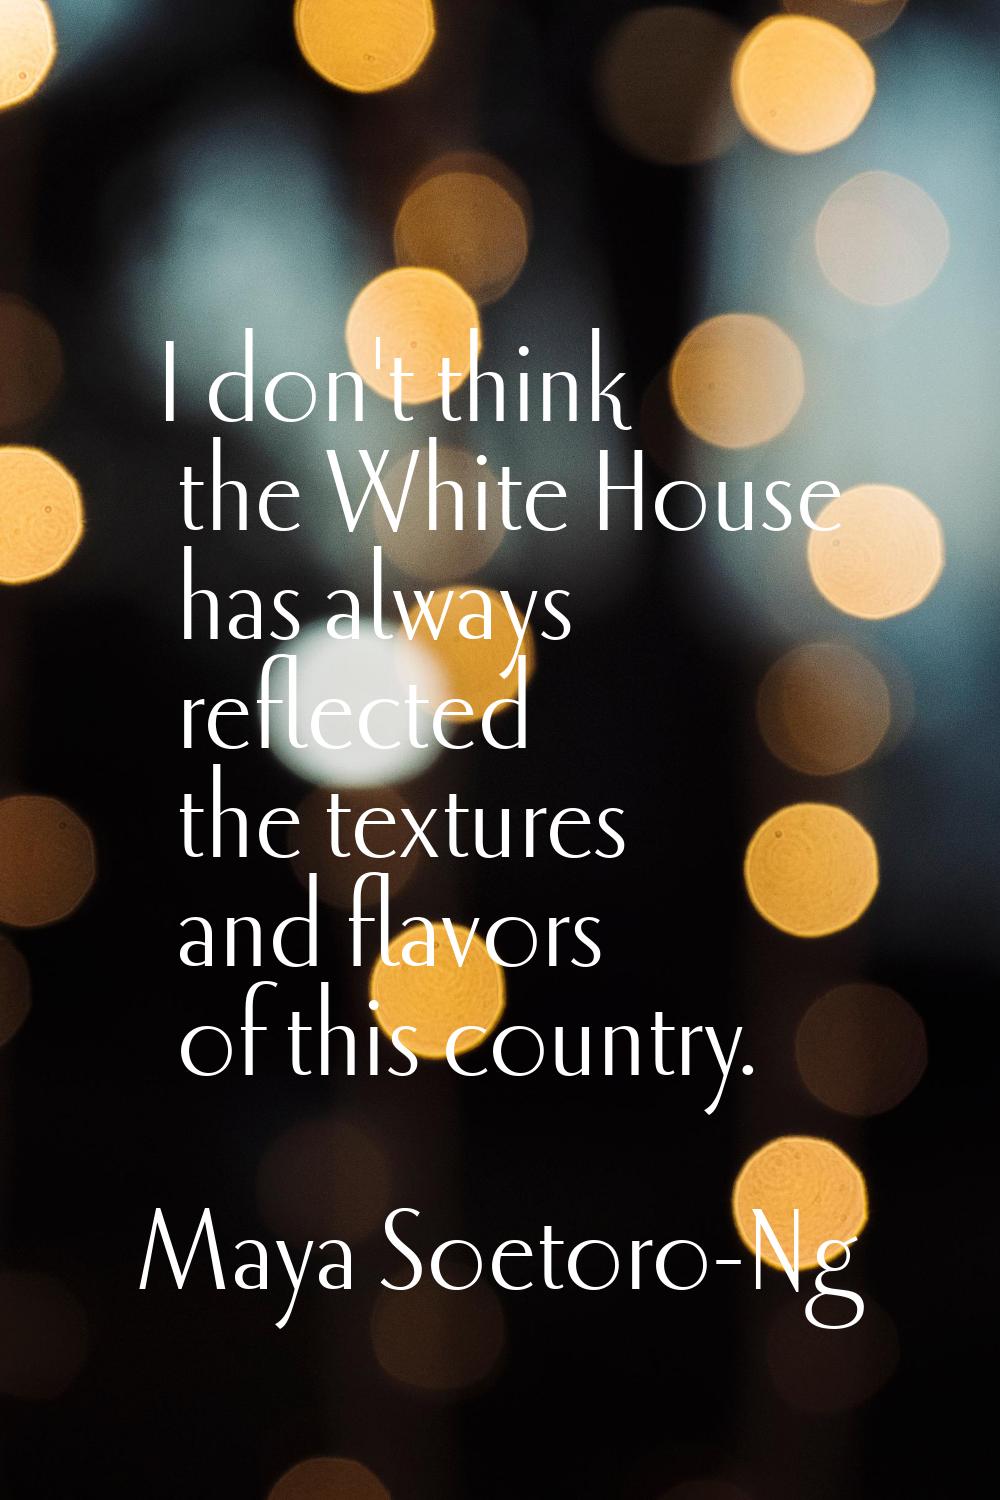 I don't think the White House has always reflected the textures and flavors of this country.